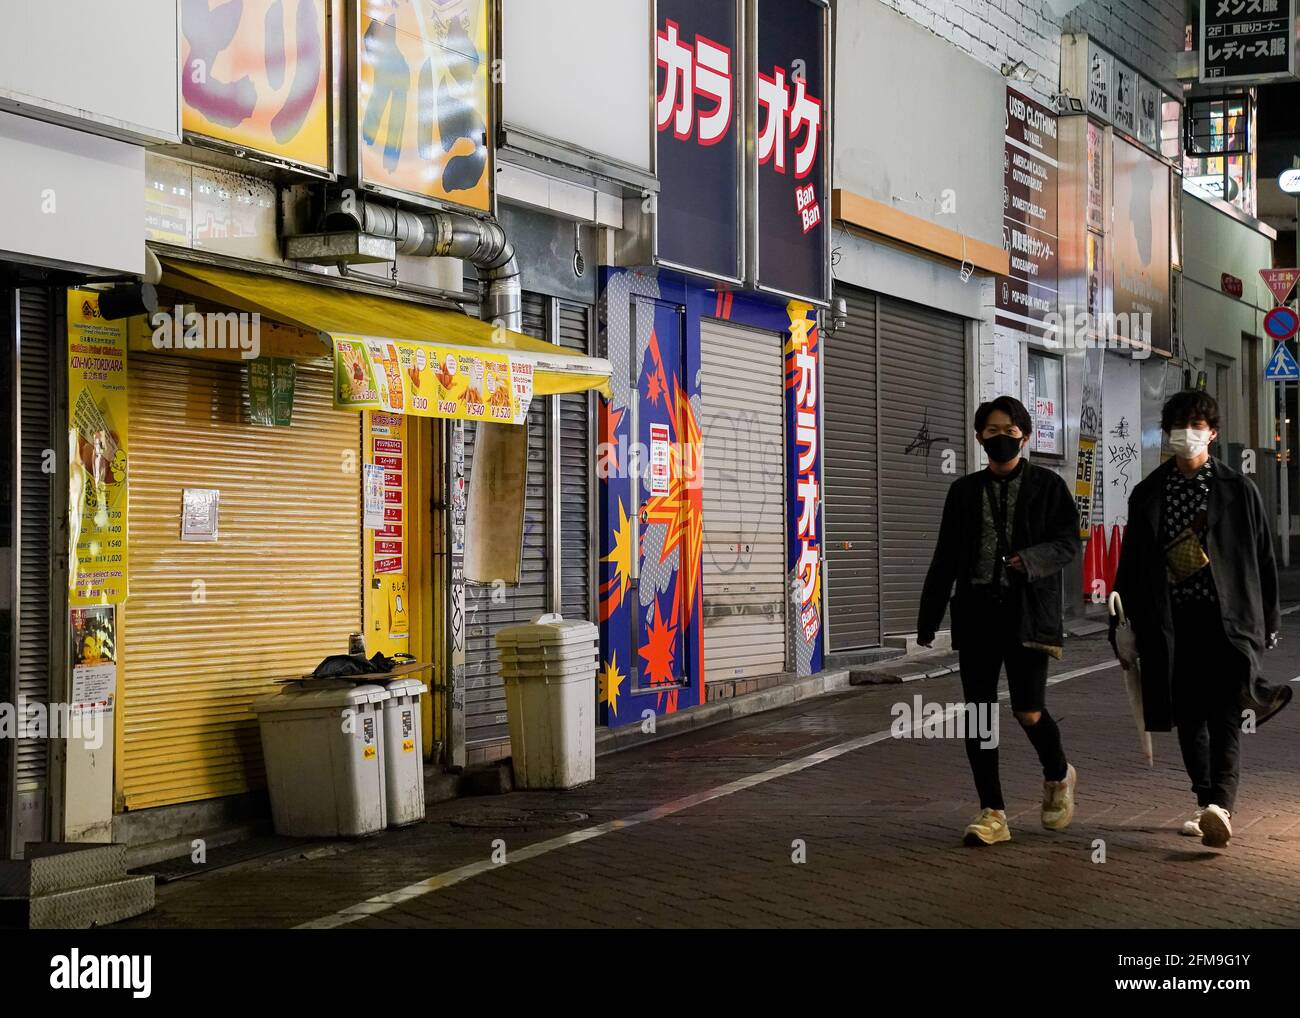 Tokyo, Japan. 7th May, 2021. People walk past closed shops in Tokyo, Japan, May 7, 2021. Japanese Prime Minister Yoshihide Suga said on Friday the government is extending the state of emergency over COVID-19 in Tokyo, Osaka, Hyogo and Kyoto until the end of May, while expanding it to Aichi and Fukuoka prefectures. The emergency state was initially set to be eased next Tuesday. Credit: Christopher Jue/Xinhua/Alamy Live News Stock Photo